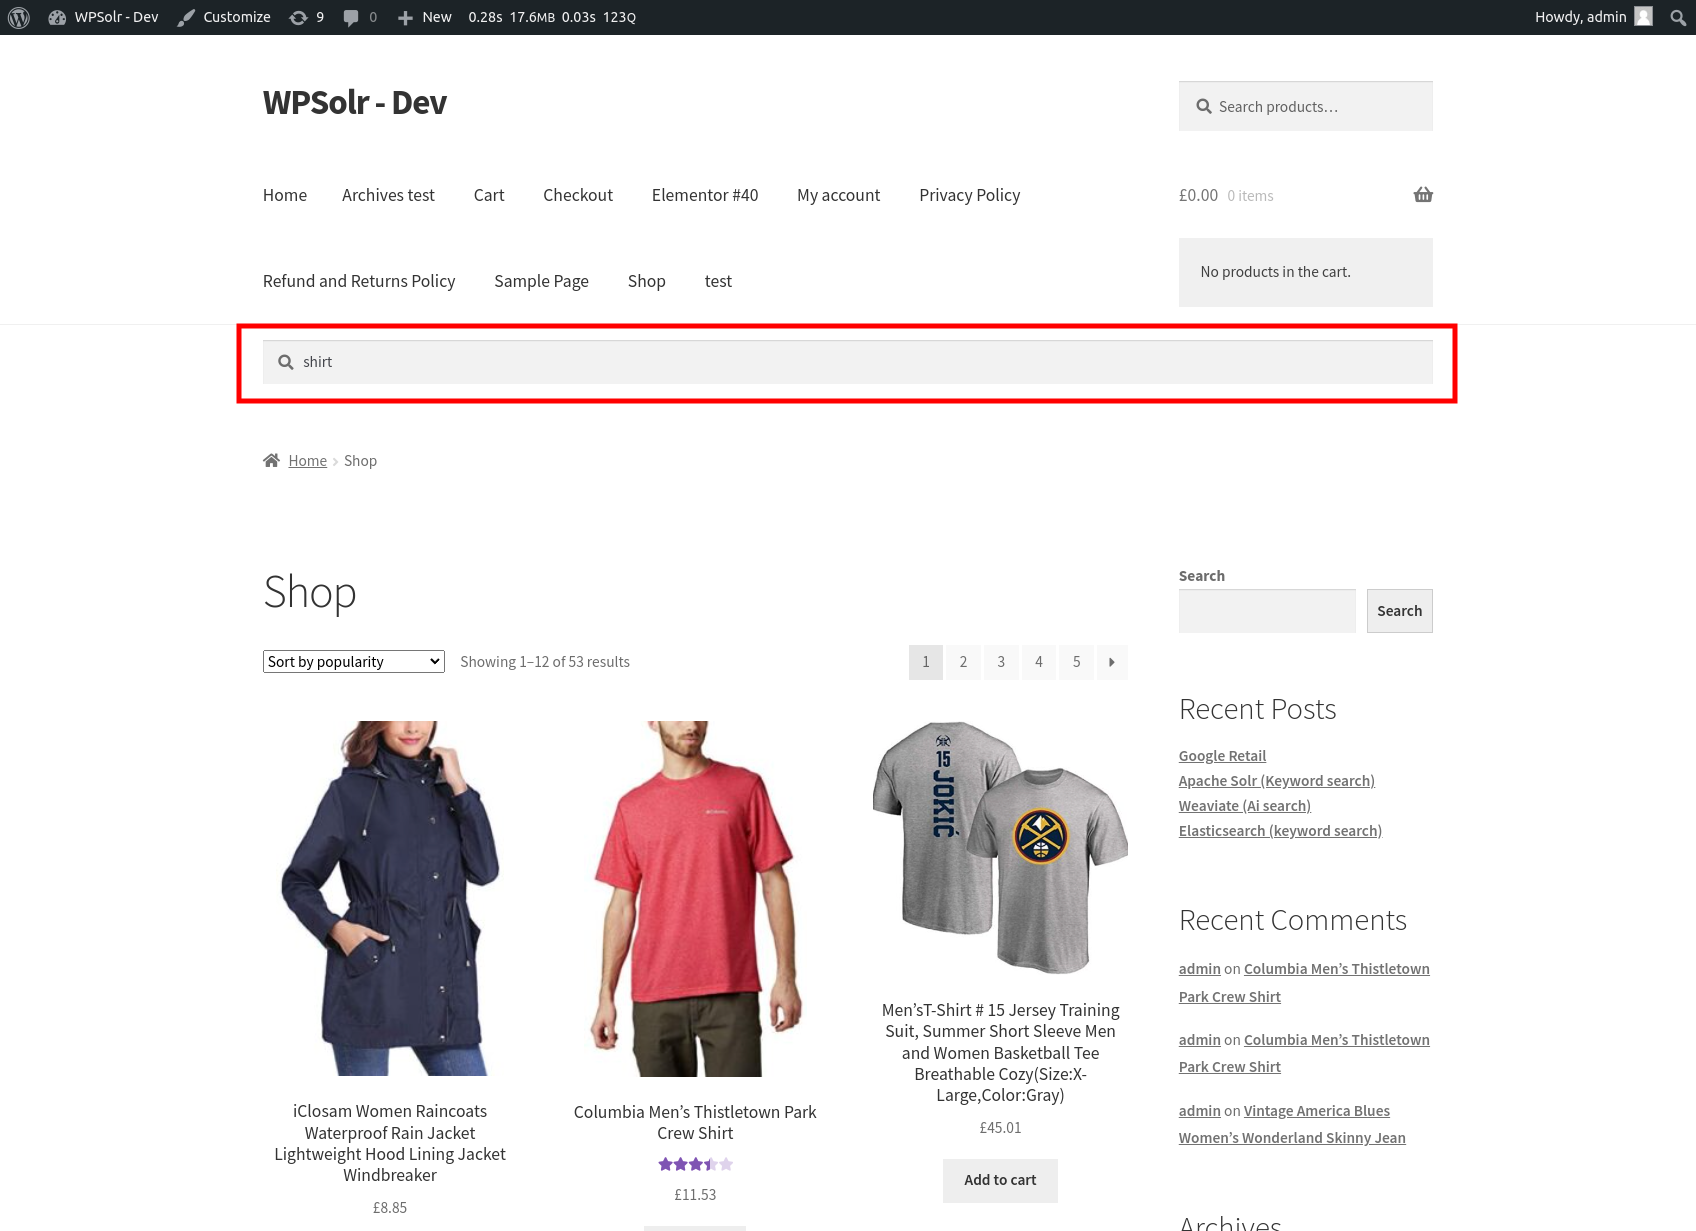 The user enters the term "shirt" in the WordPress search bar.